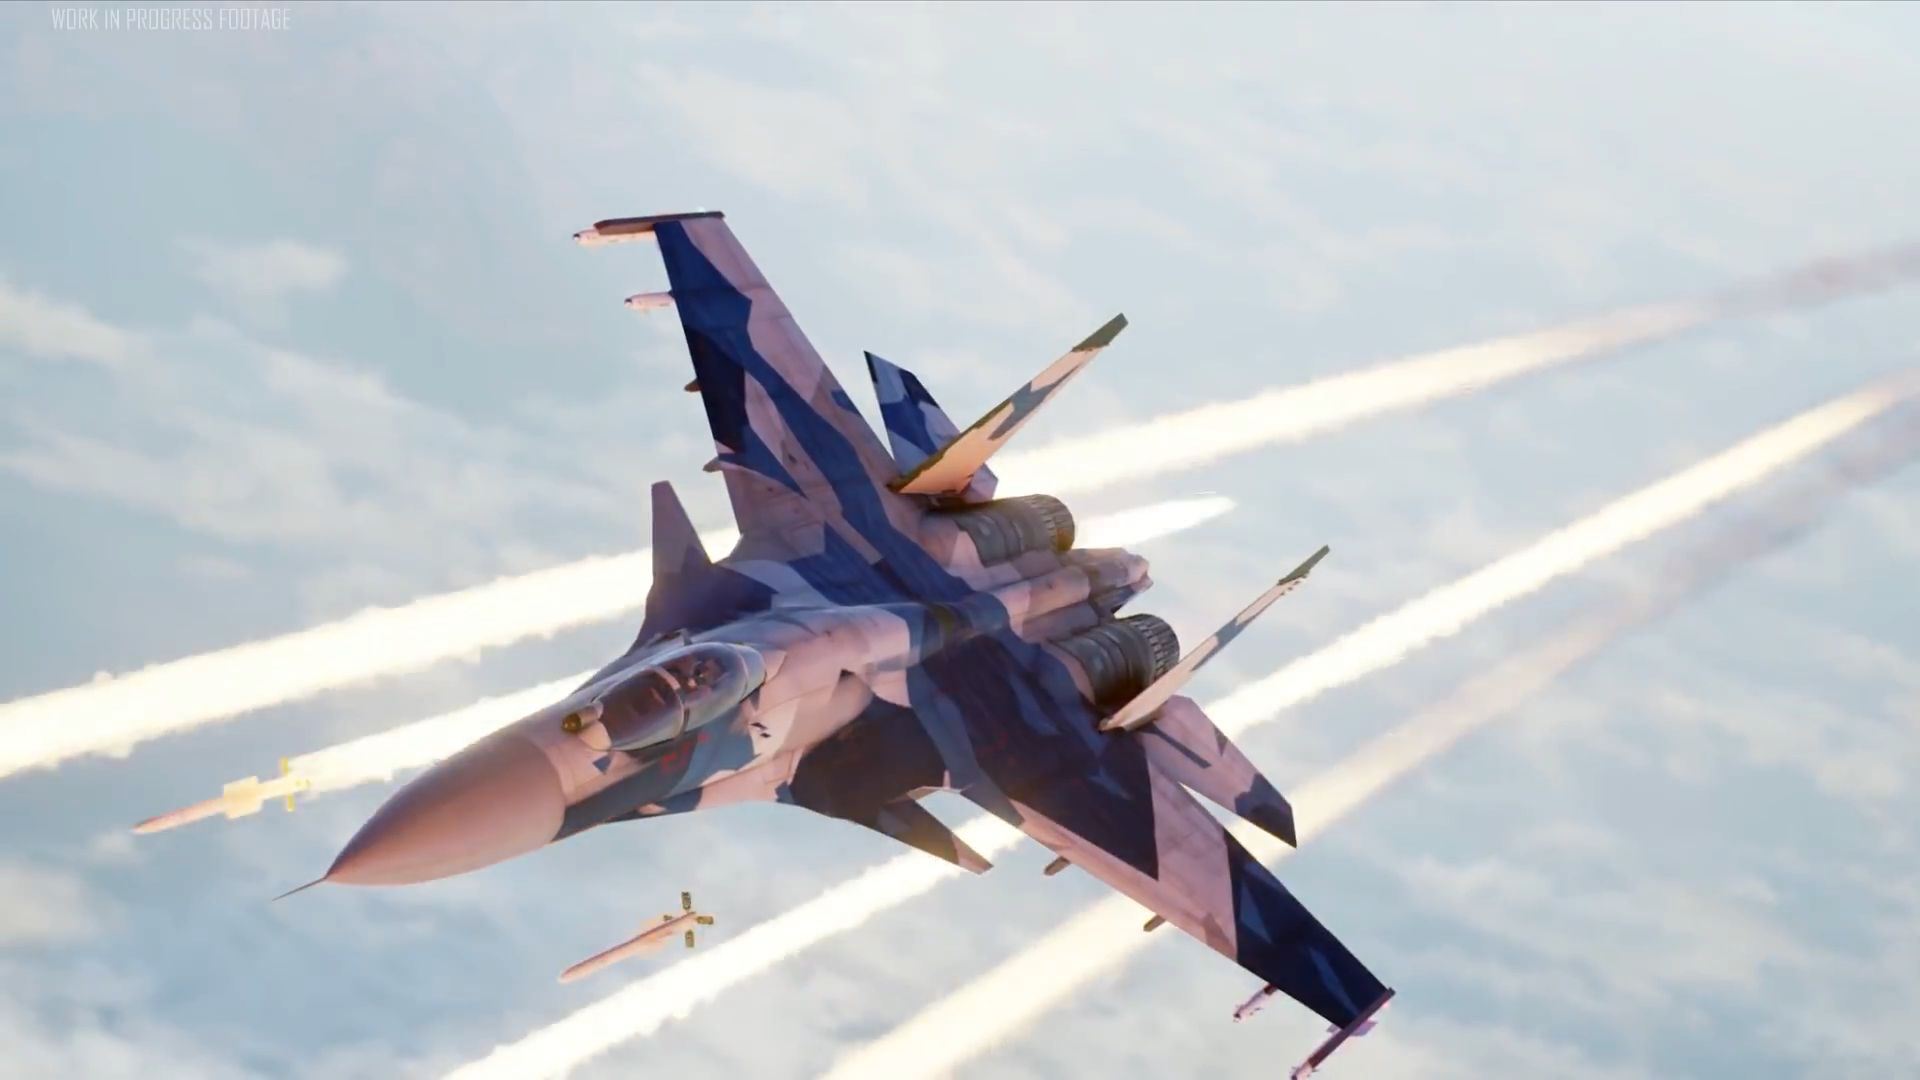 Air Combat Game Project Wingman Hits Kickstarter, And it Looks Great